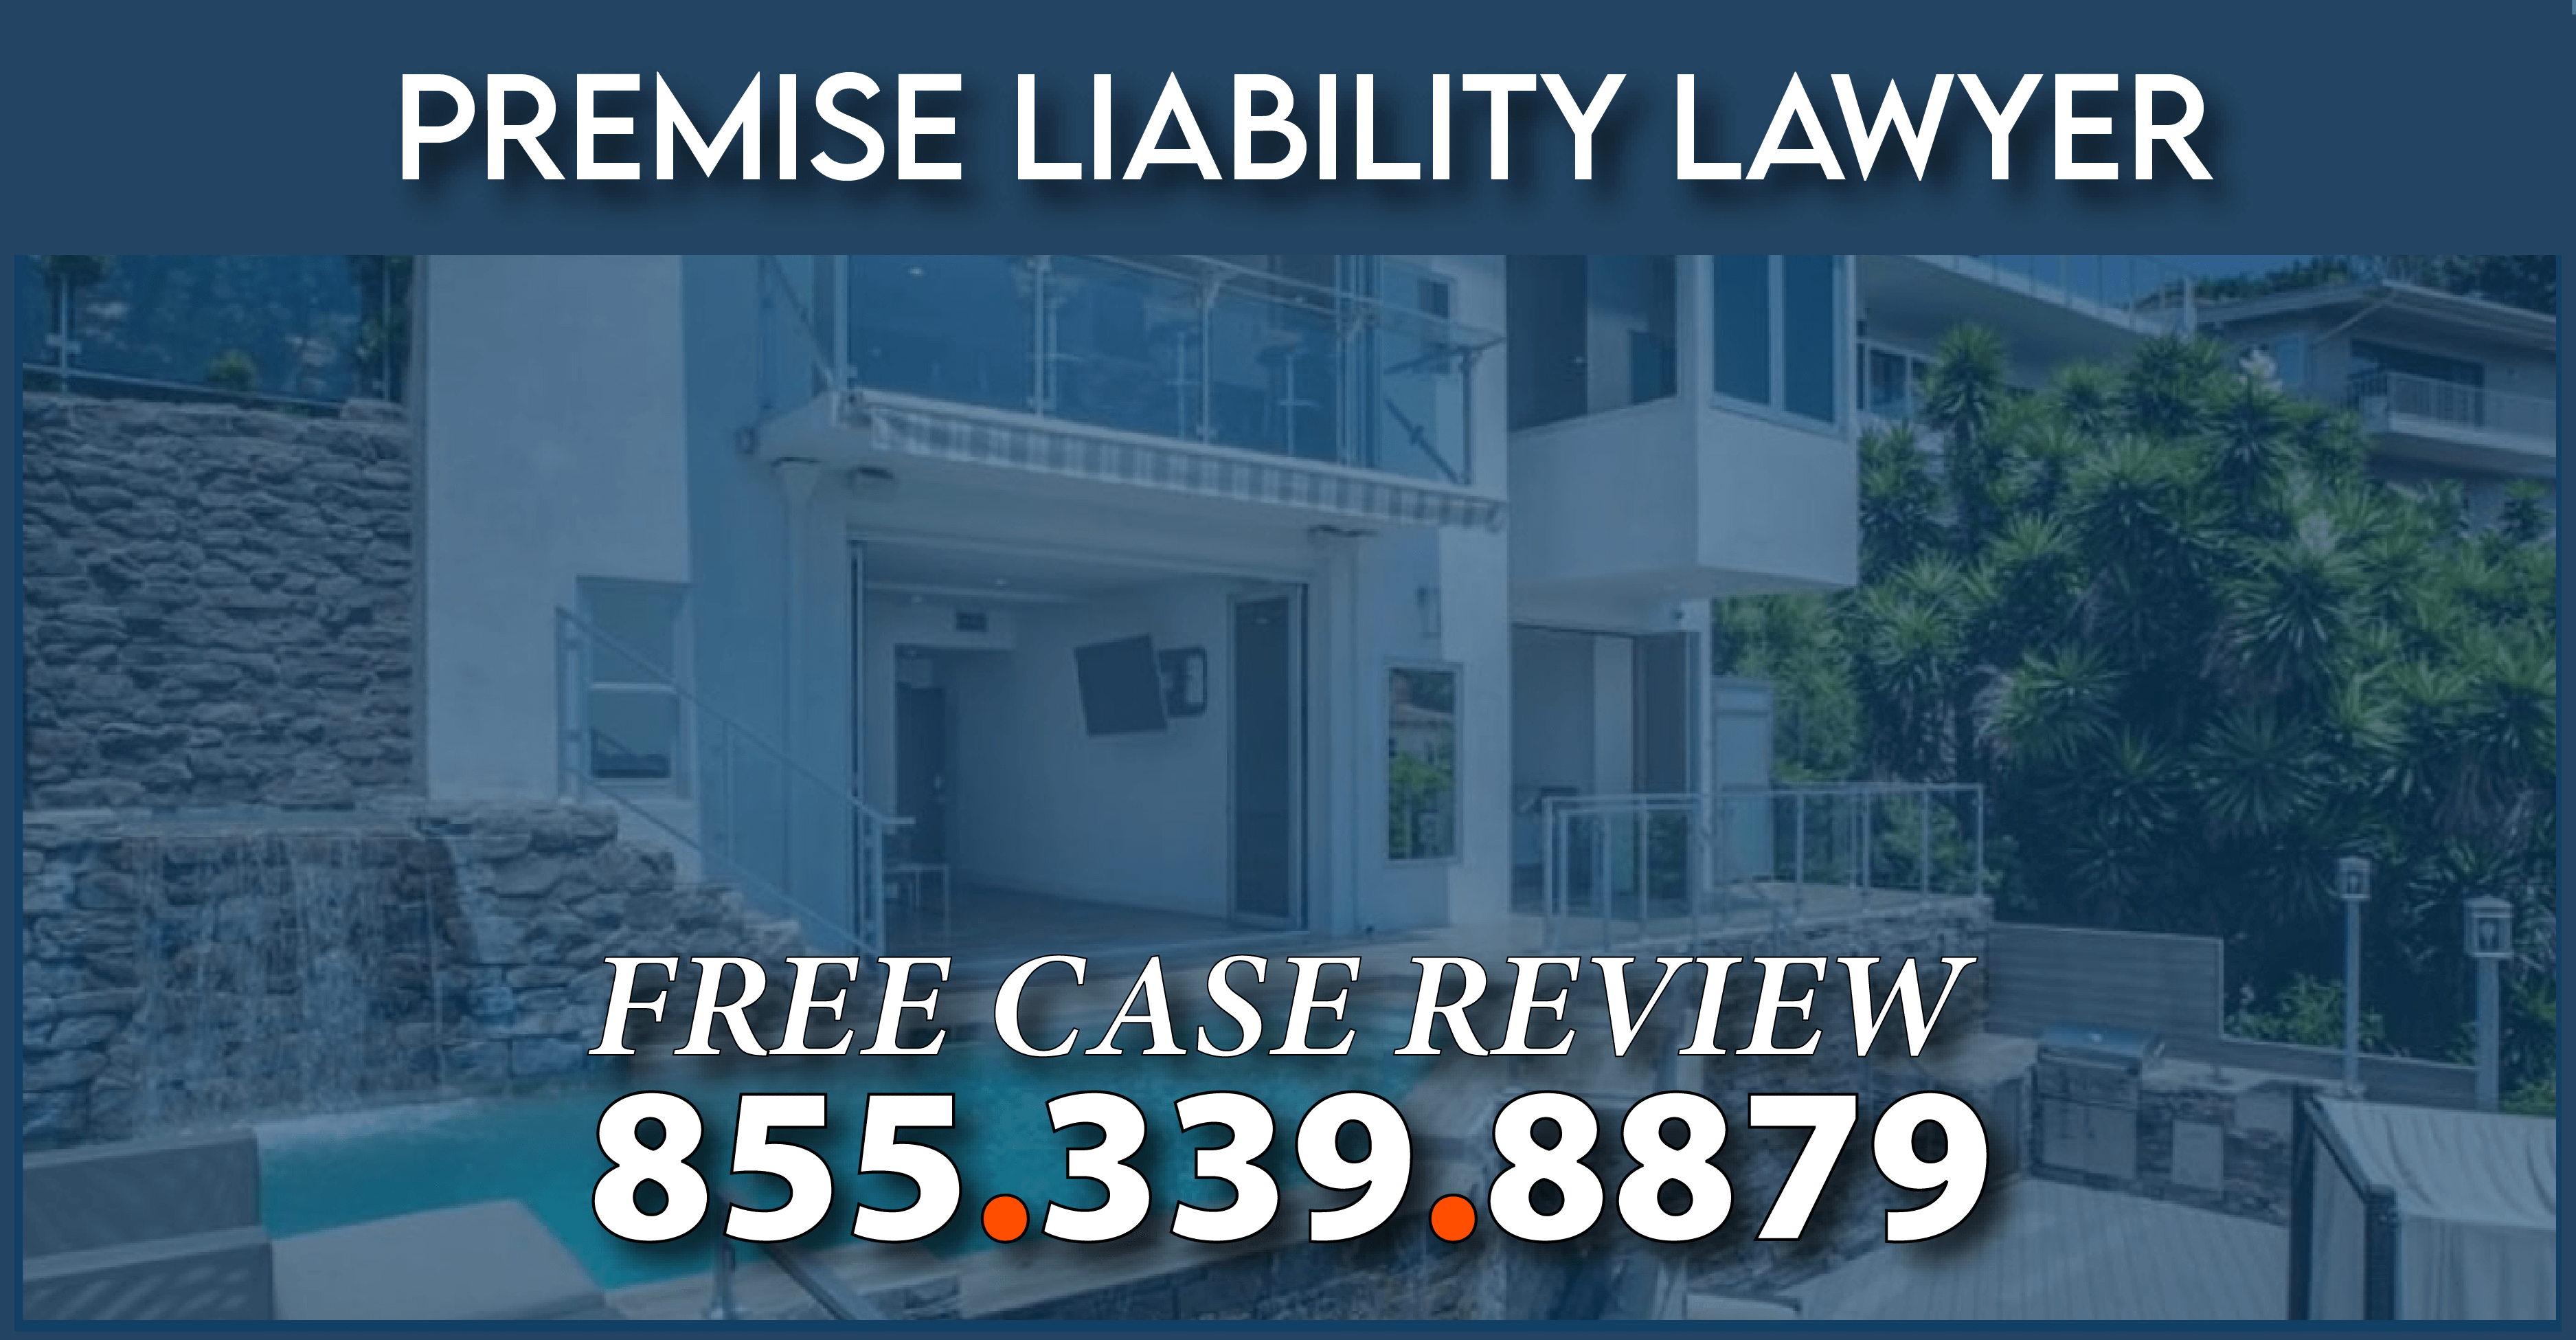 air bnb liability accident slip and fall lawyer premise attorney compensation sue questions